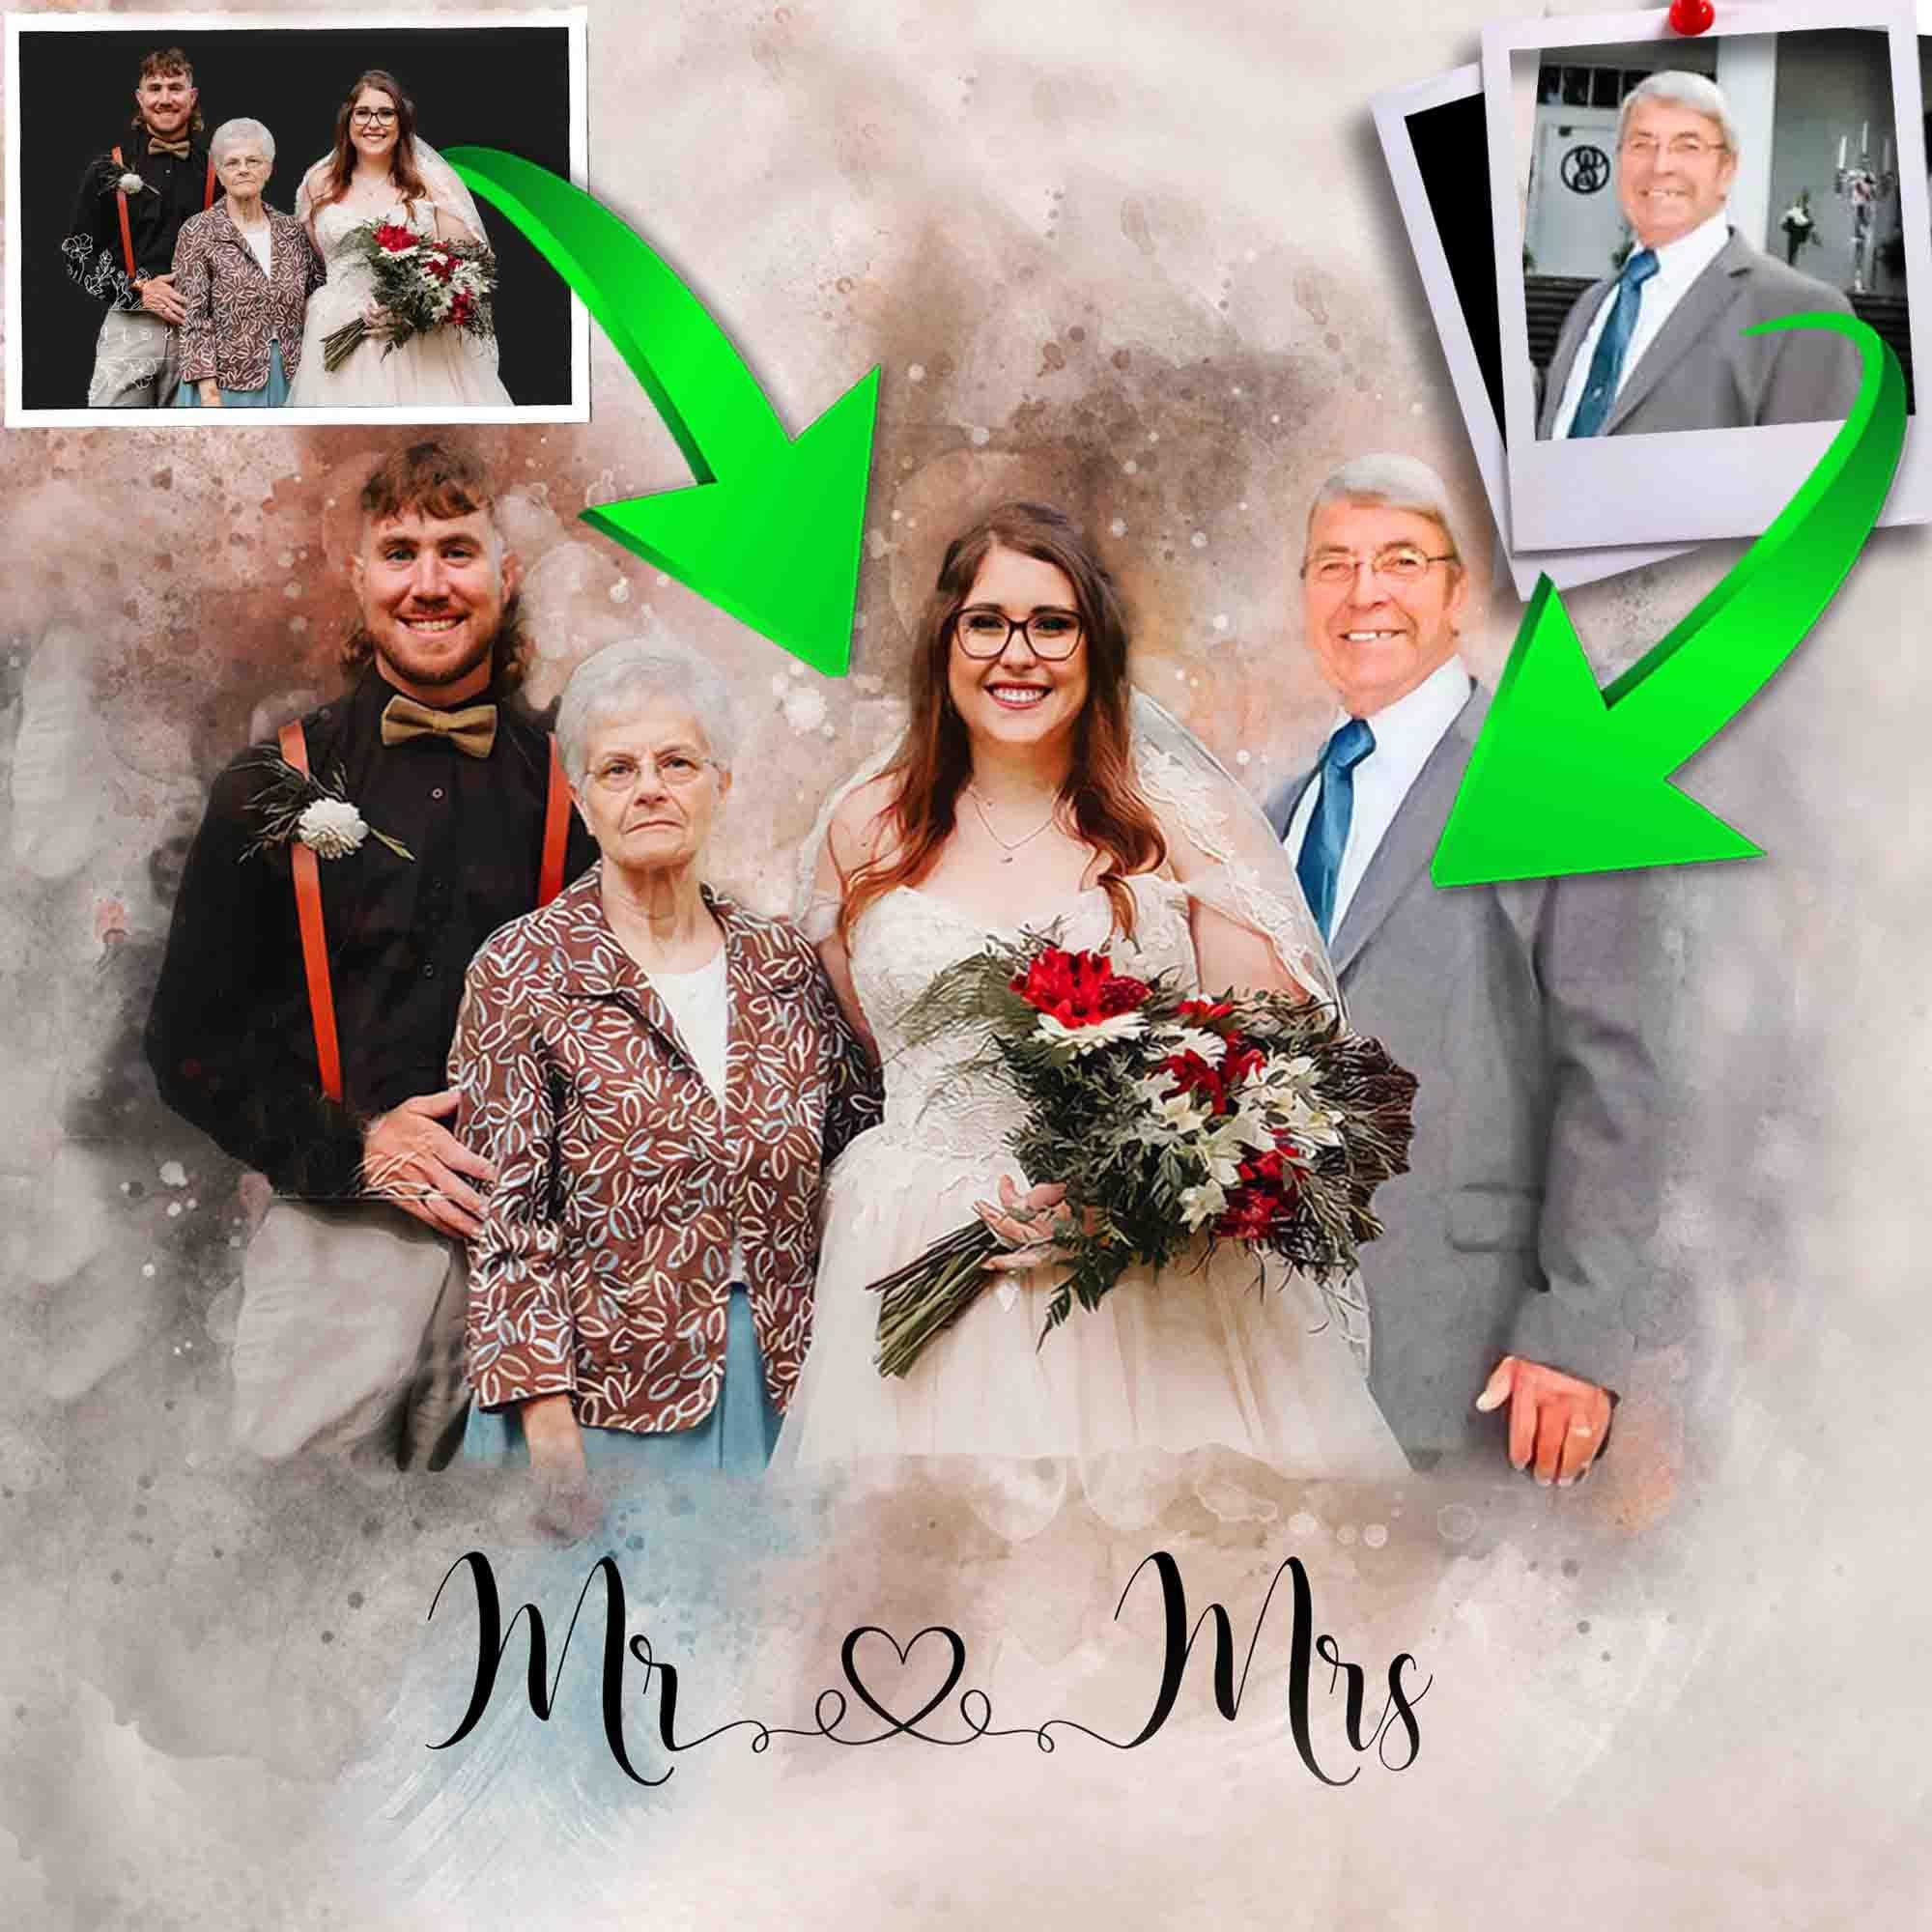 Add People to Photos, Add a Loved one to a Photo, Family Photo with Deceased - FromPicToArt